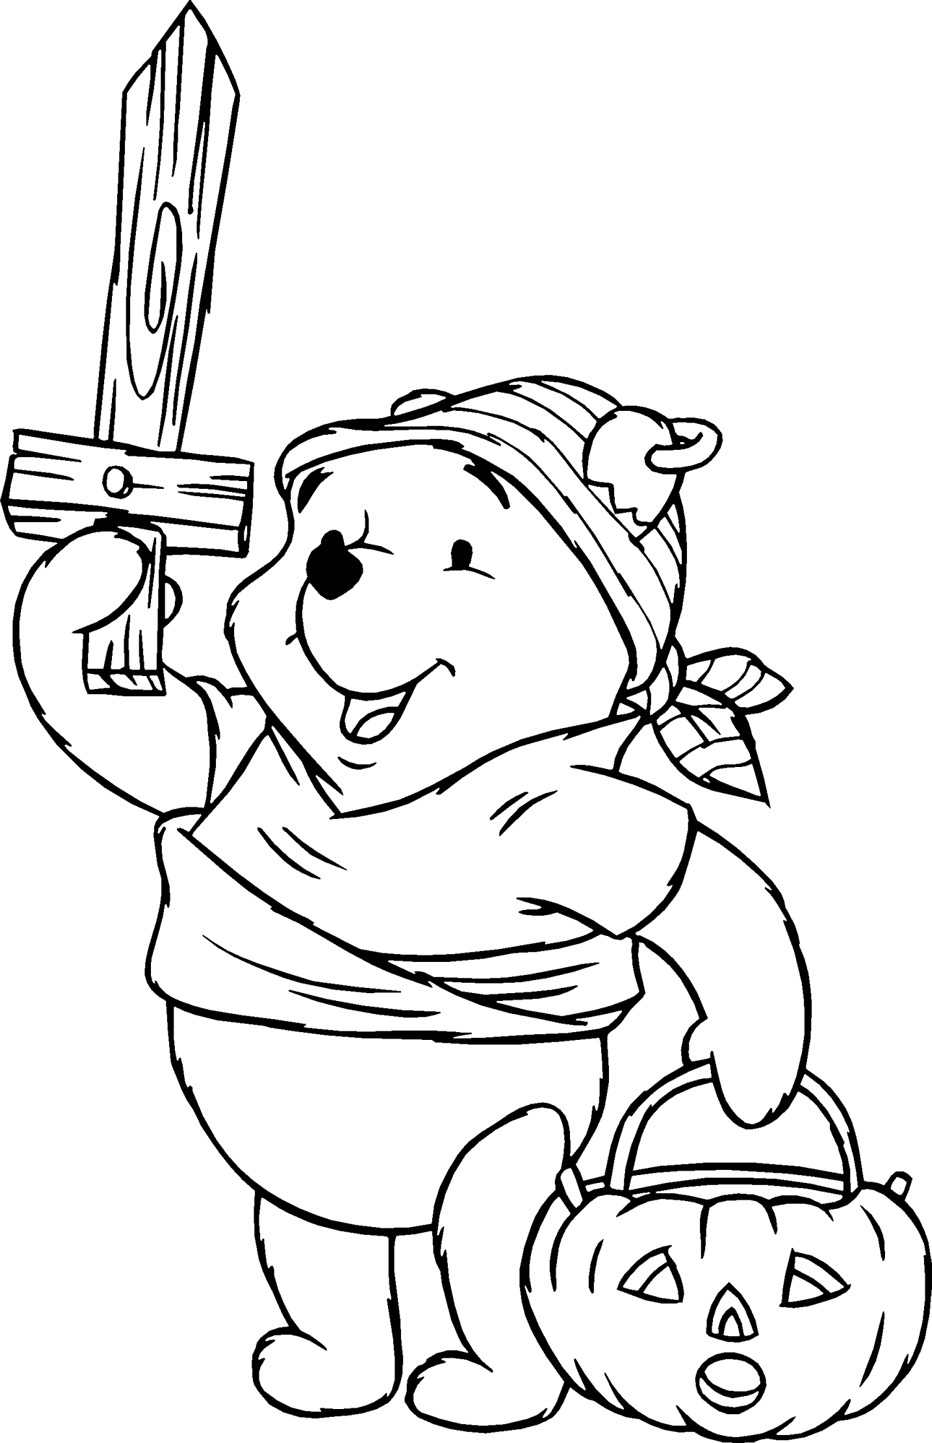  Coloring Pages For Kids Free Printable 10